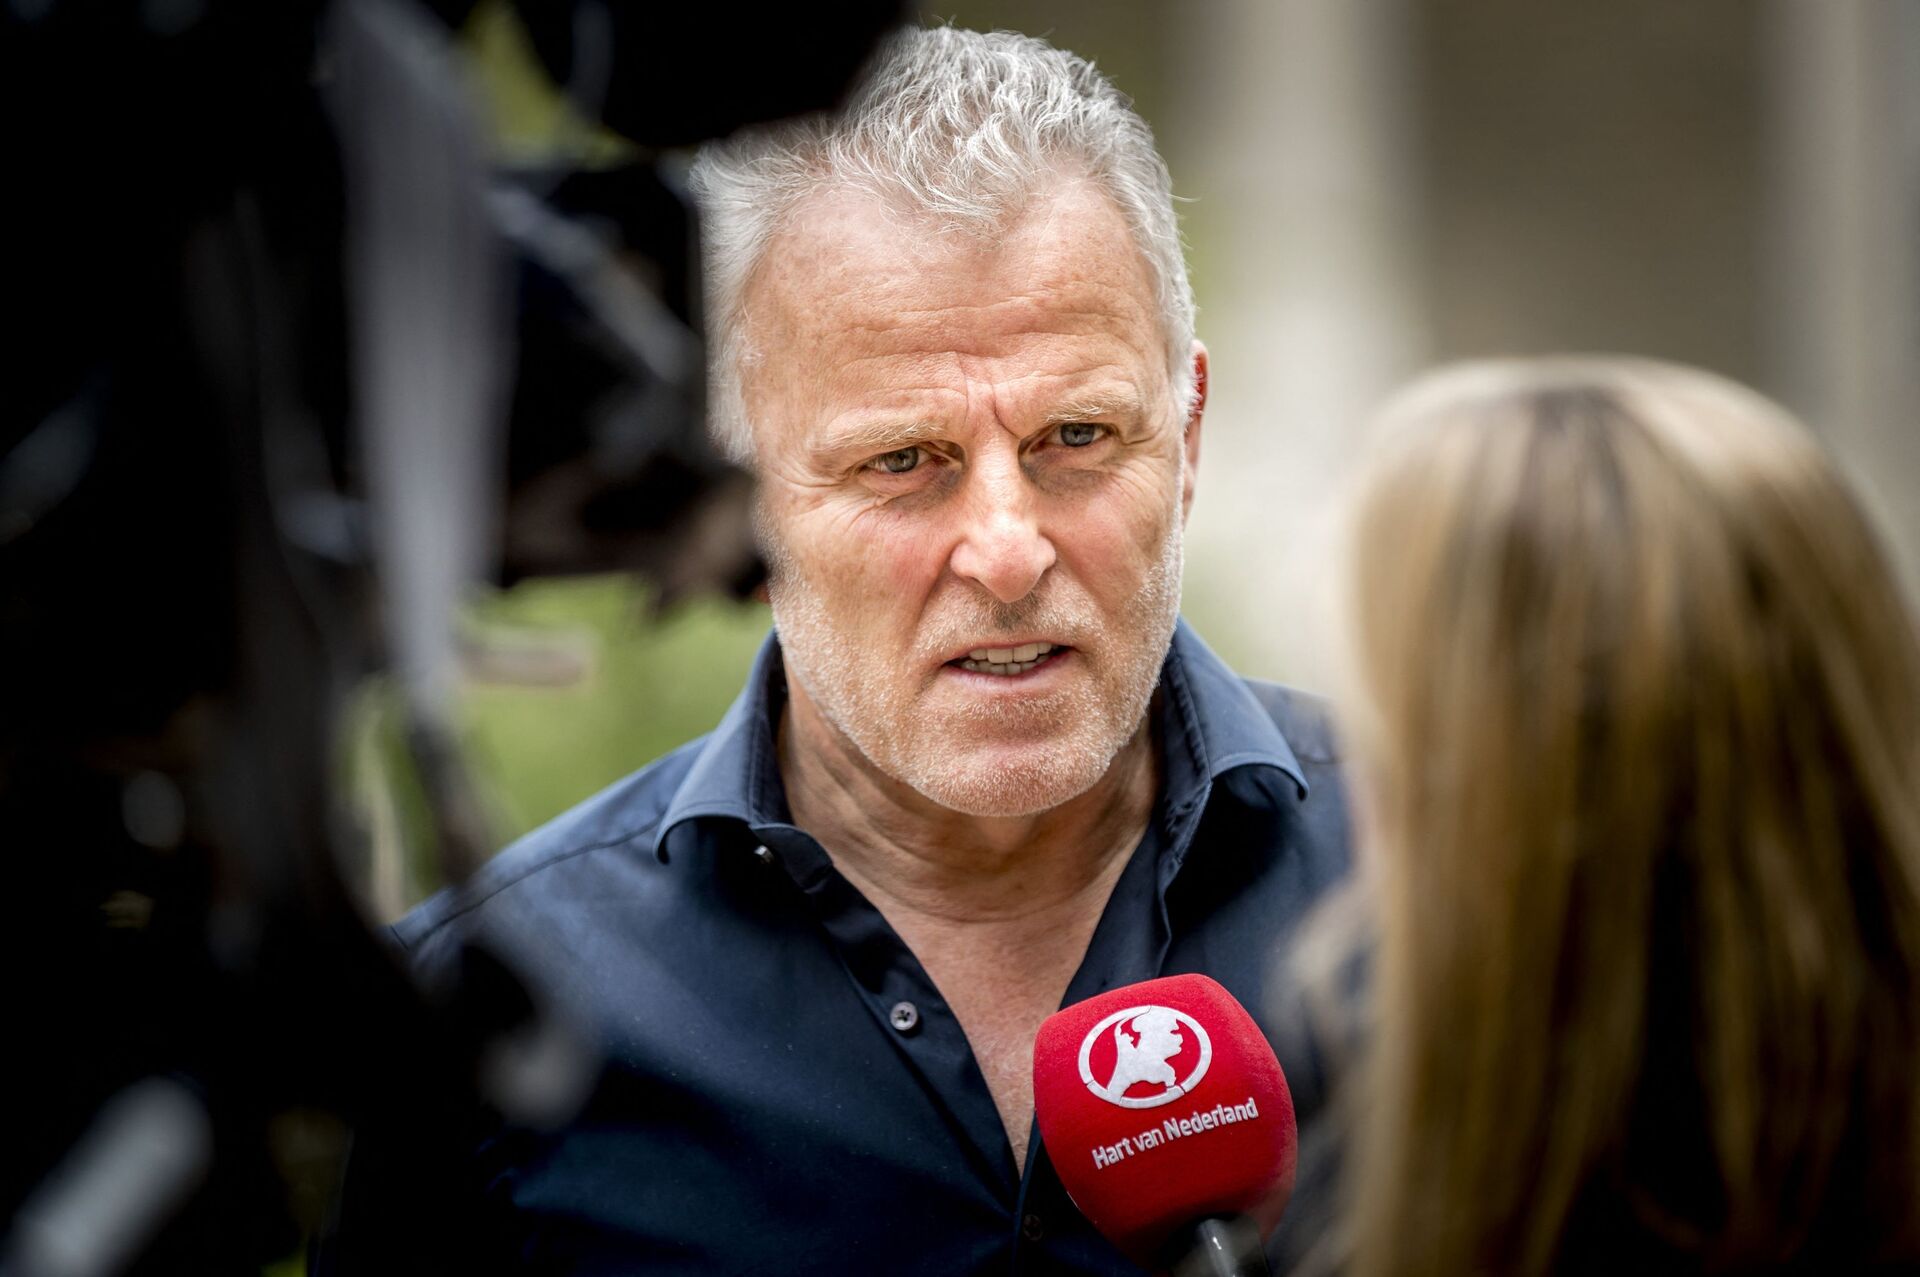 In this photograph taken on May 24, 2017, Dutch crime reporter Peter R. de Vries speaks with media representatives in Arnhem. - A well-known Dutch crime reporter  was rushed to hospital with gunshot wounds on July 6, 2021 - Sputnik International, 1920, 07.09.2021